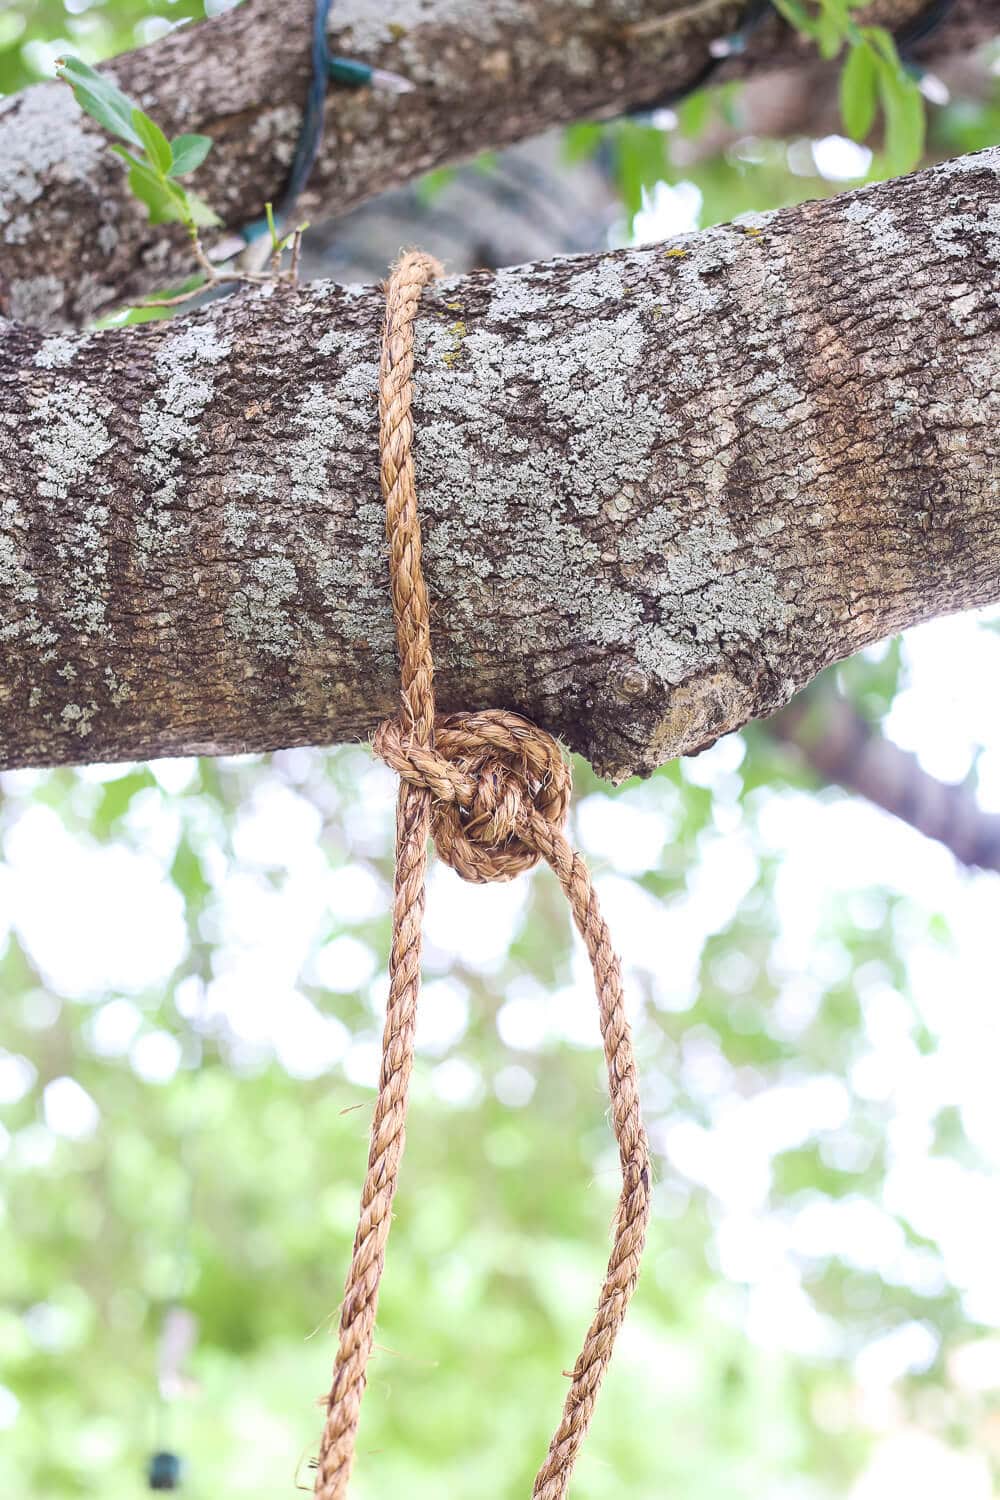 How to tie knot for tree swing